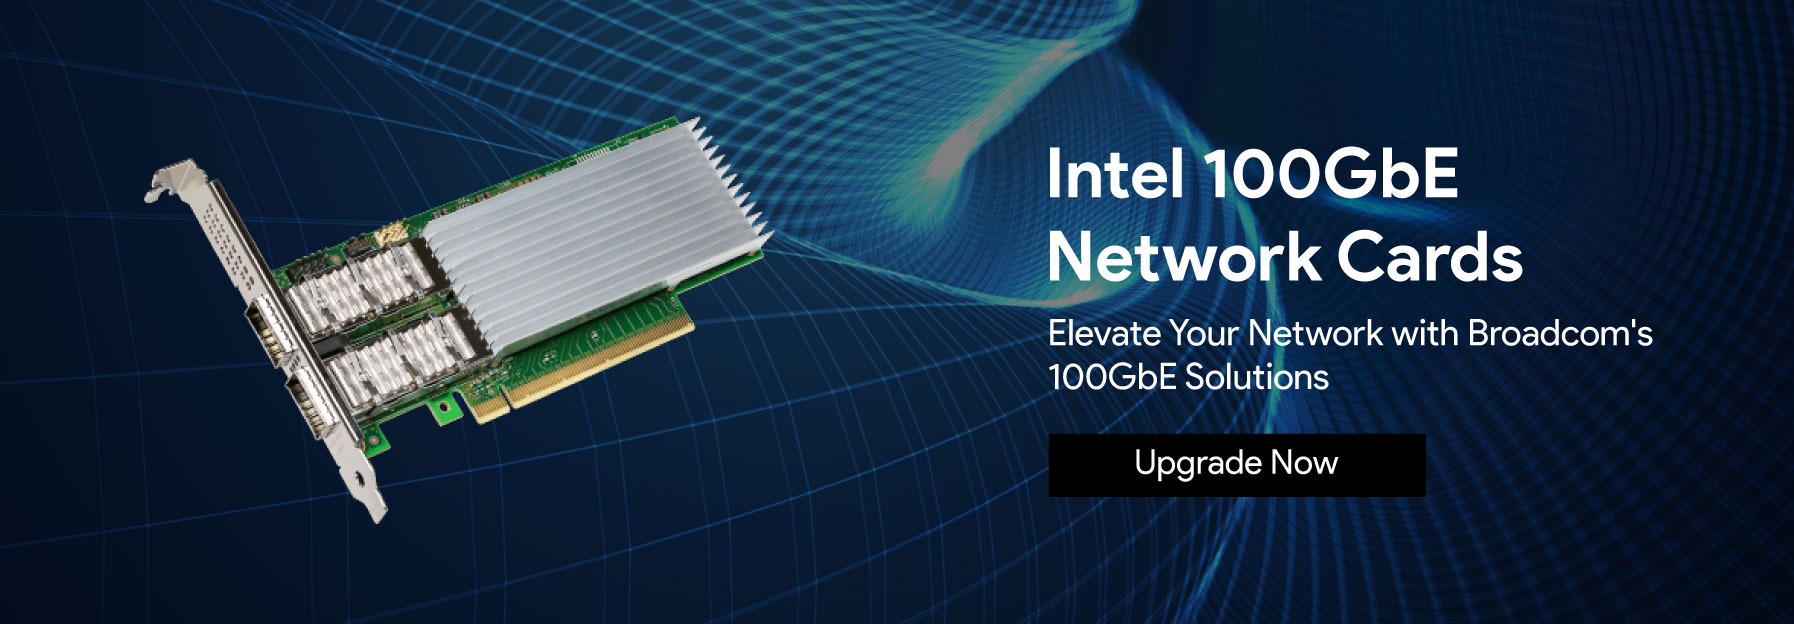 intel 100gbe network cards